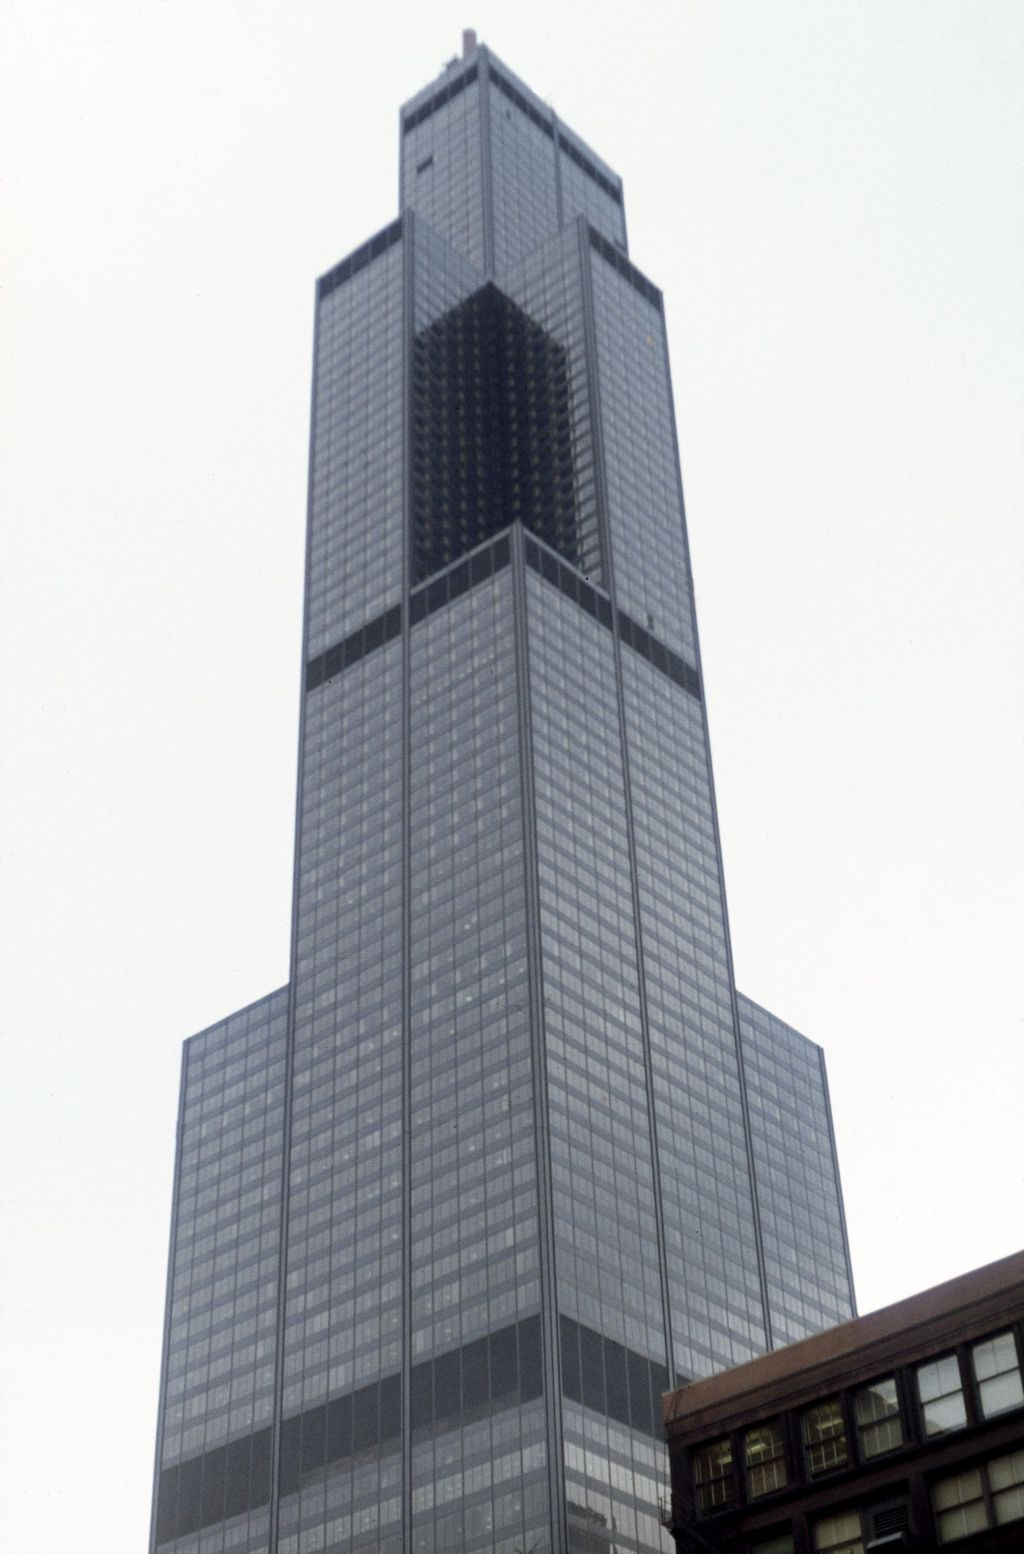 Miniature of Sears Tower